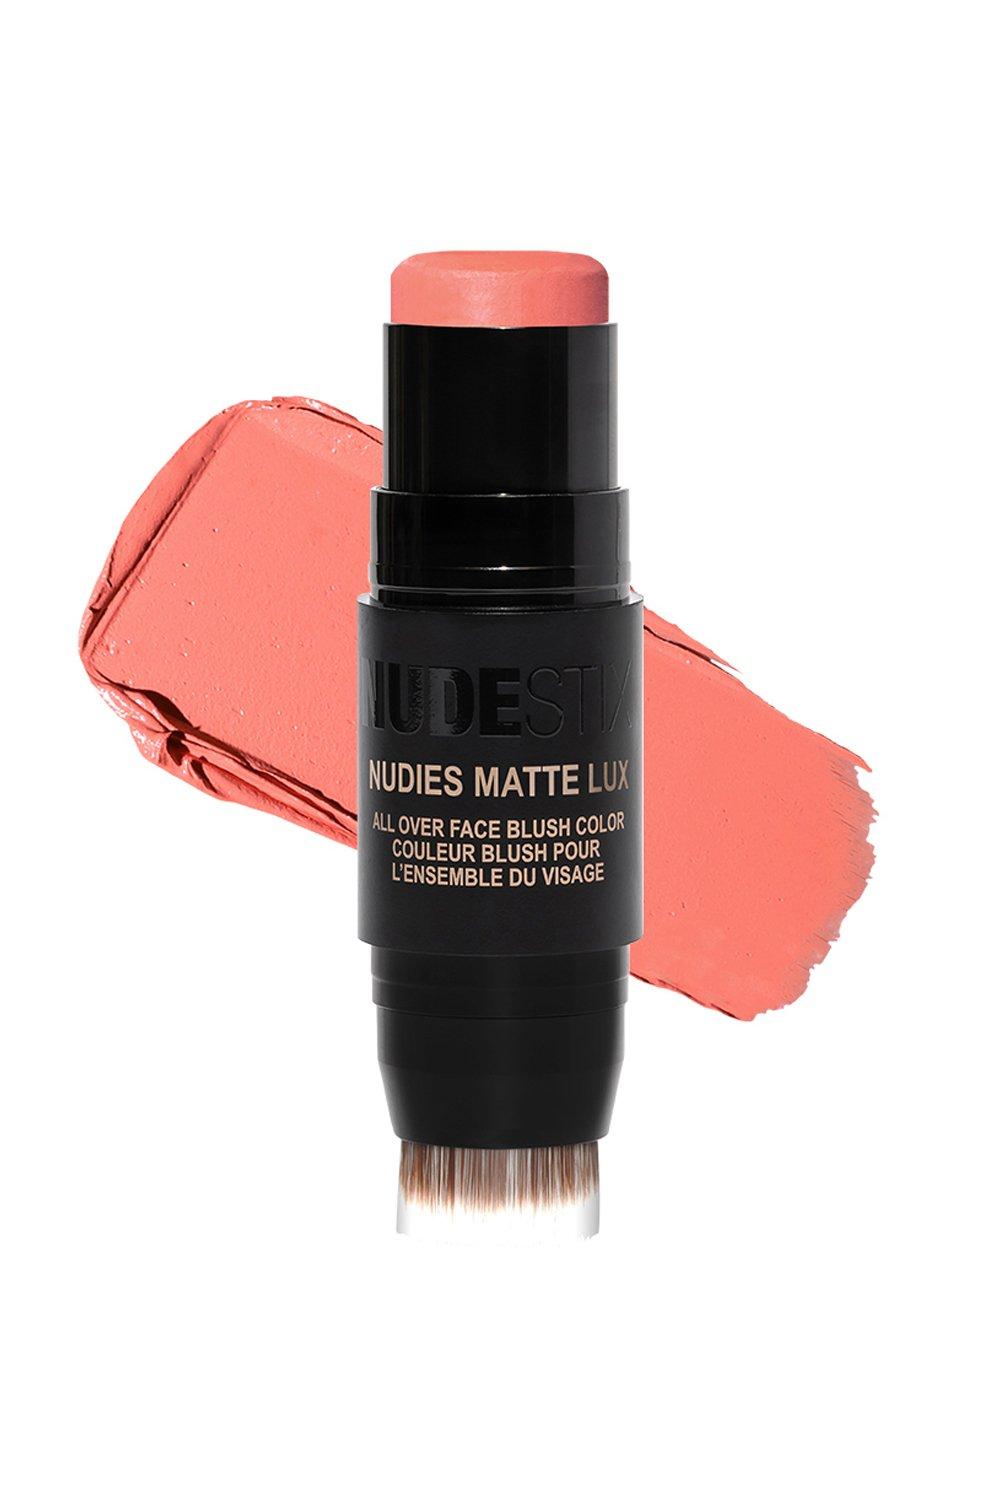 Face, Nudies Matte Lux - All Over Face Blush